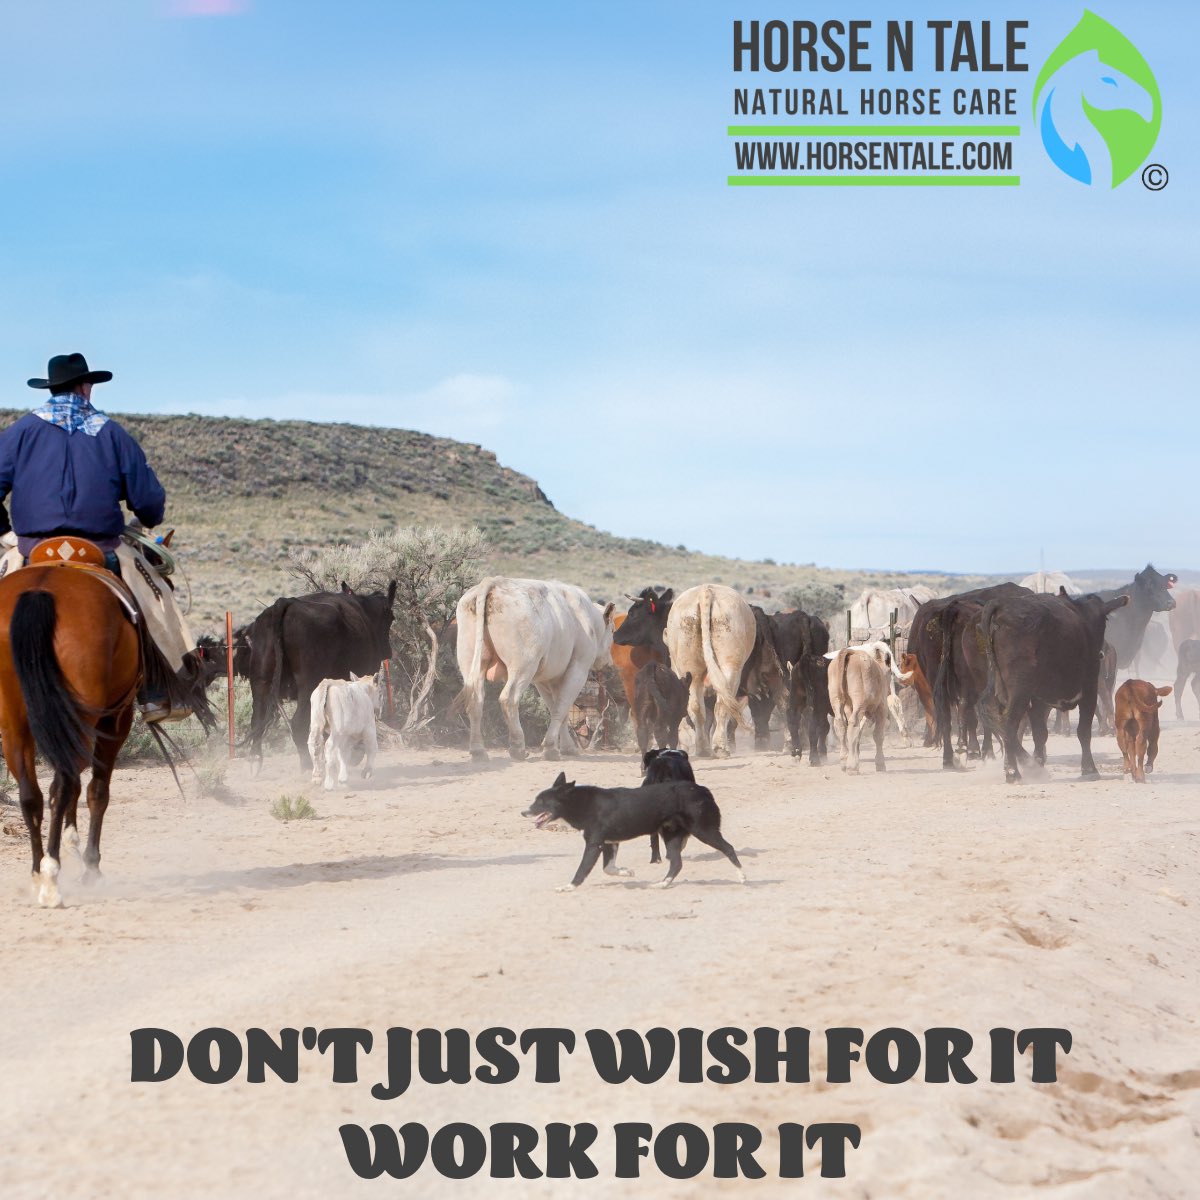 Monday Motivation.
DON'T JUST WISH FOR IT WORK FOR IT.
#horsentale #topicalequineproducts #naturalhorsecare #equine #horse #naturalingredients 
#teamhnt #teamhorsentale 
#horselife #horsemanship 
#horselover 
#motivationmonday #MondayMotivation #Monday #mondaymindset #motivation